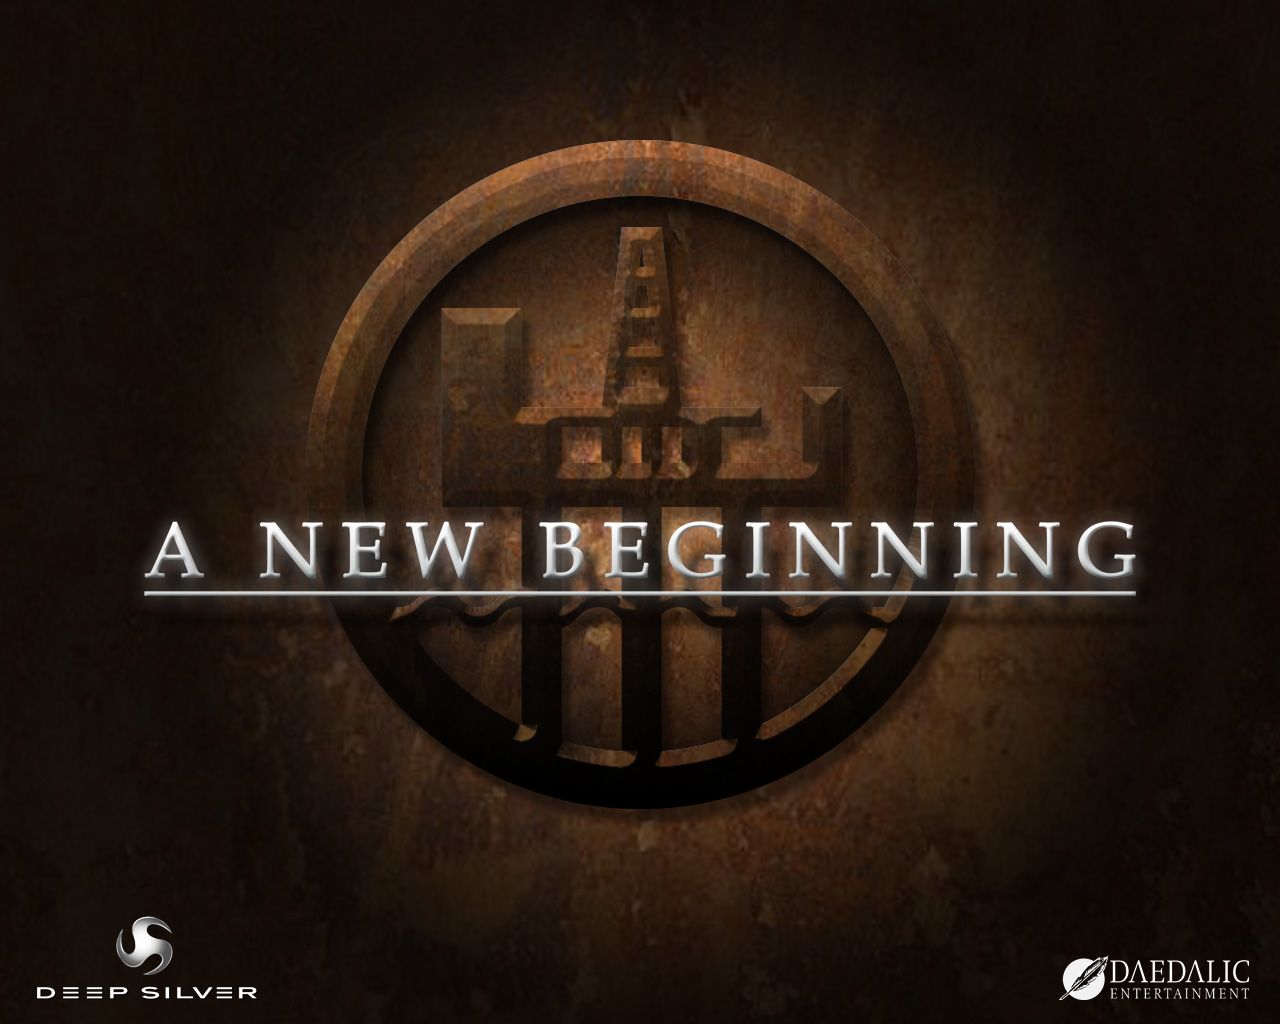 New Beginning, A: free desktop wallpaper and background image